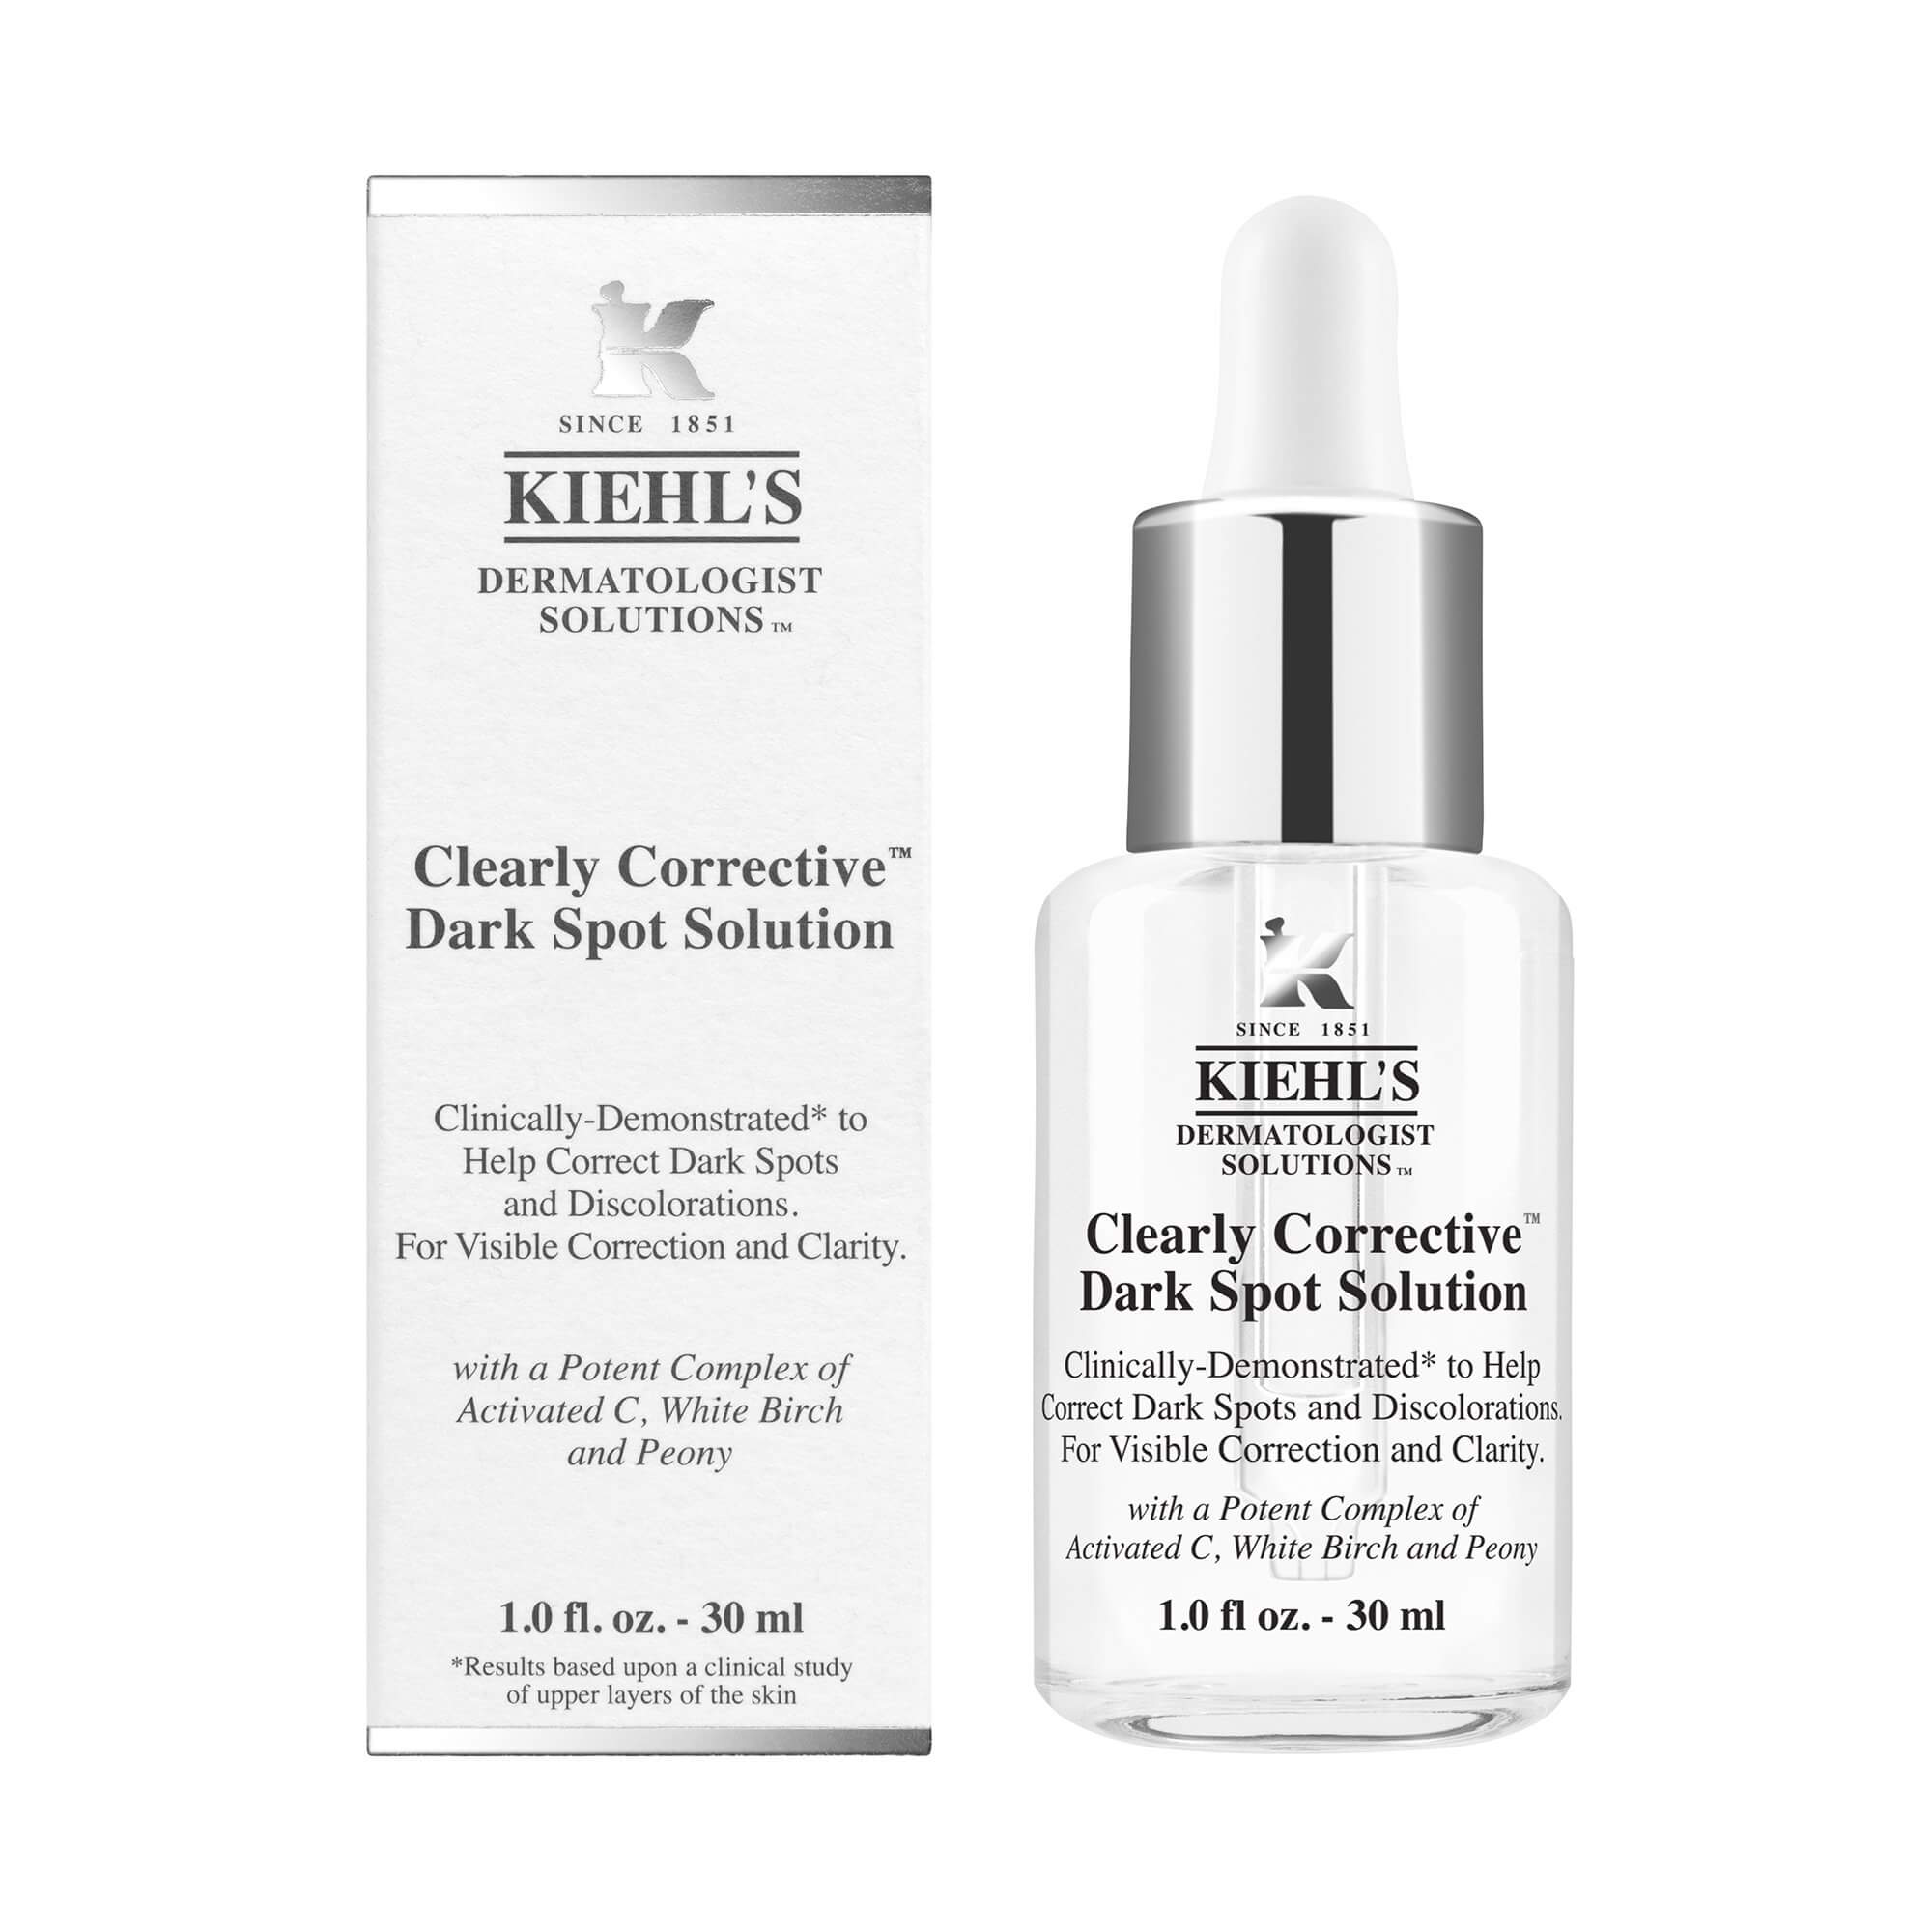 Thiết kế của Kiehl's Clearly Corrective Dark Spot Solution